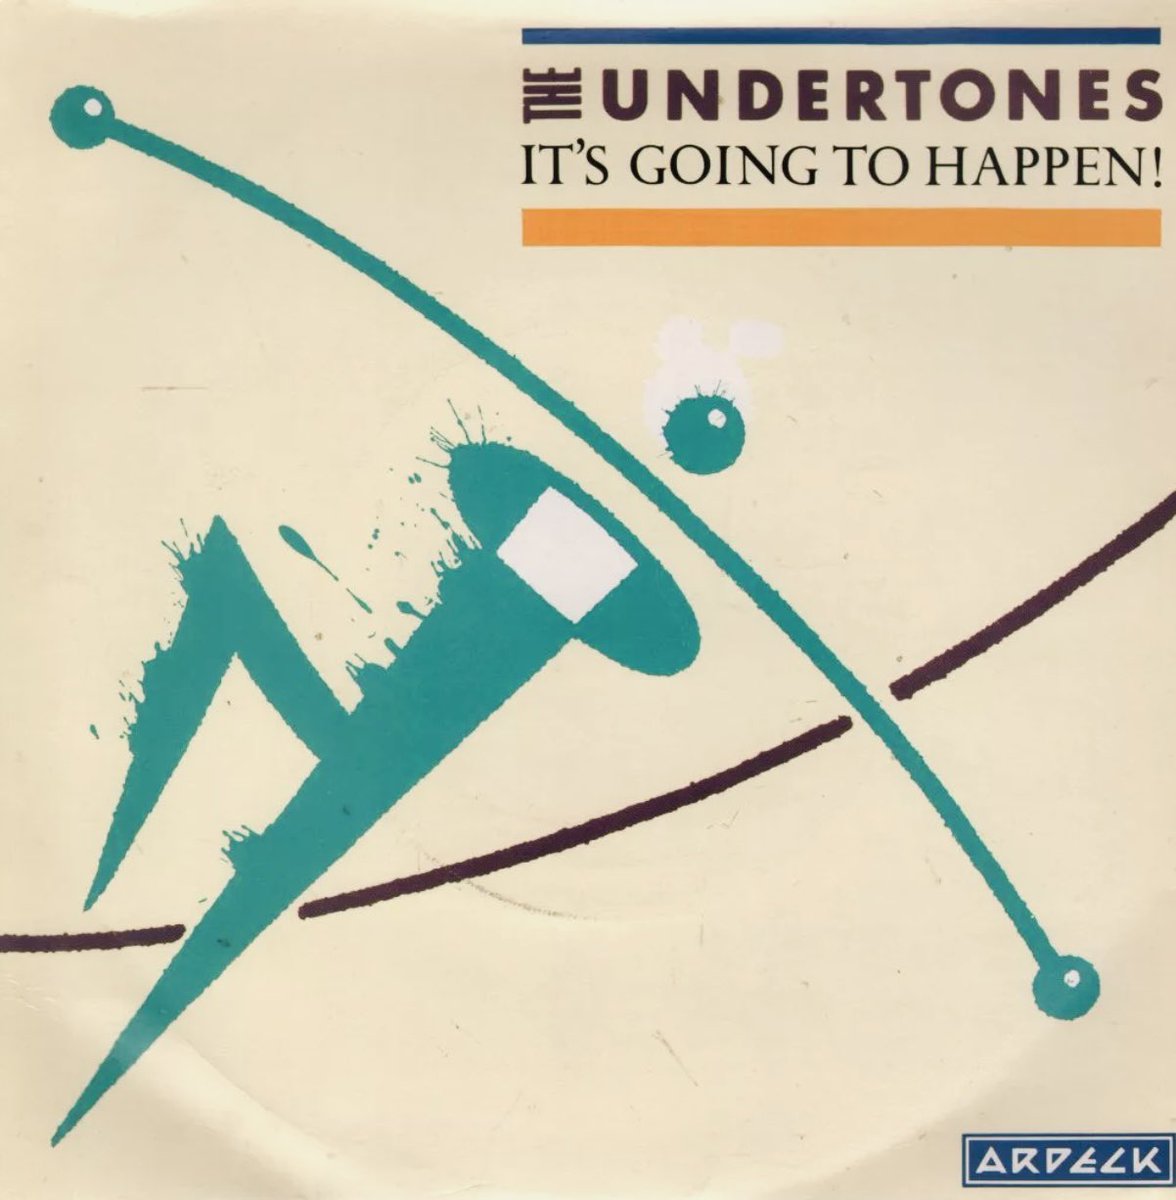 What a run of great singles this band had

The Undertones 
It’s Going To Happen 

21 April 1981

#theundertones @Feargal_Sharkey #punk #80s #vinylsingle #vinylcommunity #recordcollector #music